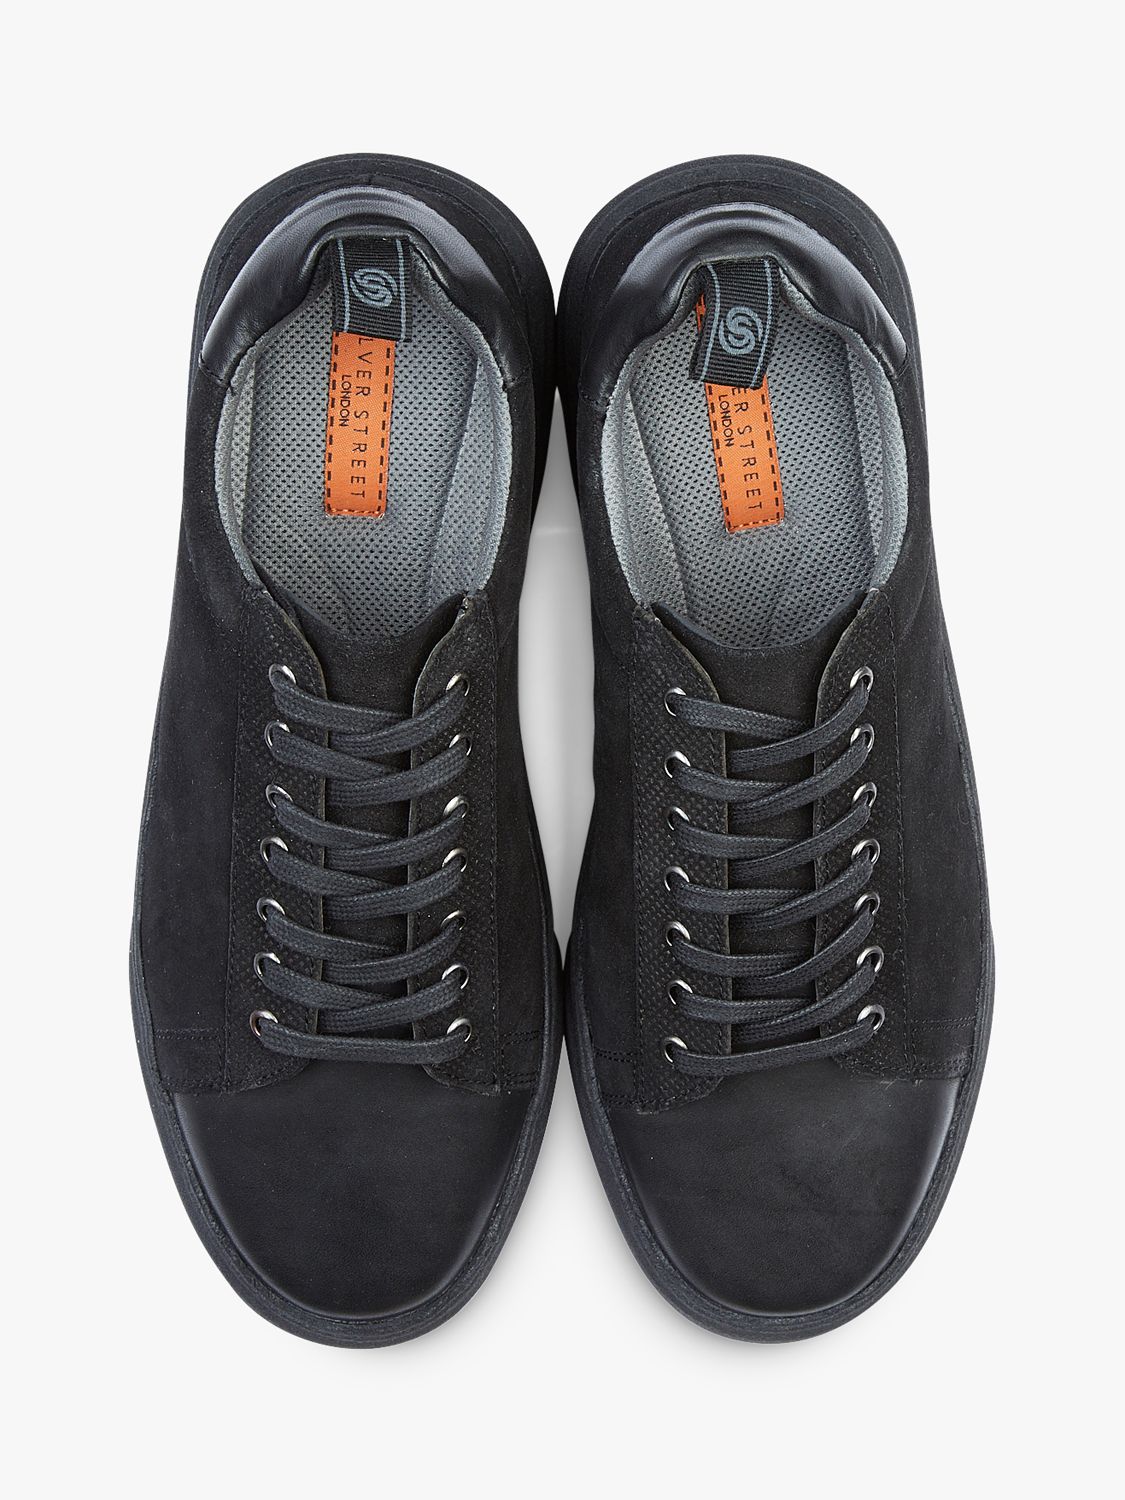 Buy Silver Street London Charterhouse Suede Trainers, Black Online at johnlewis.com